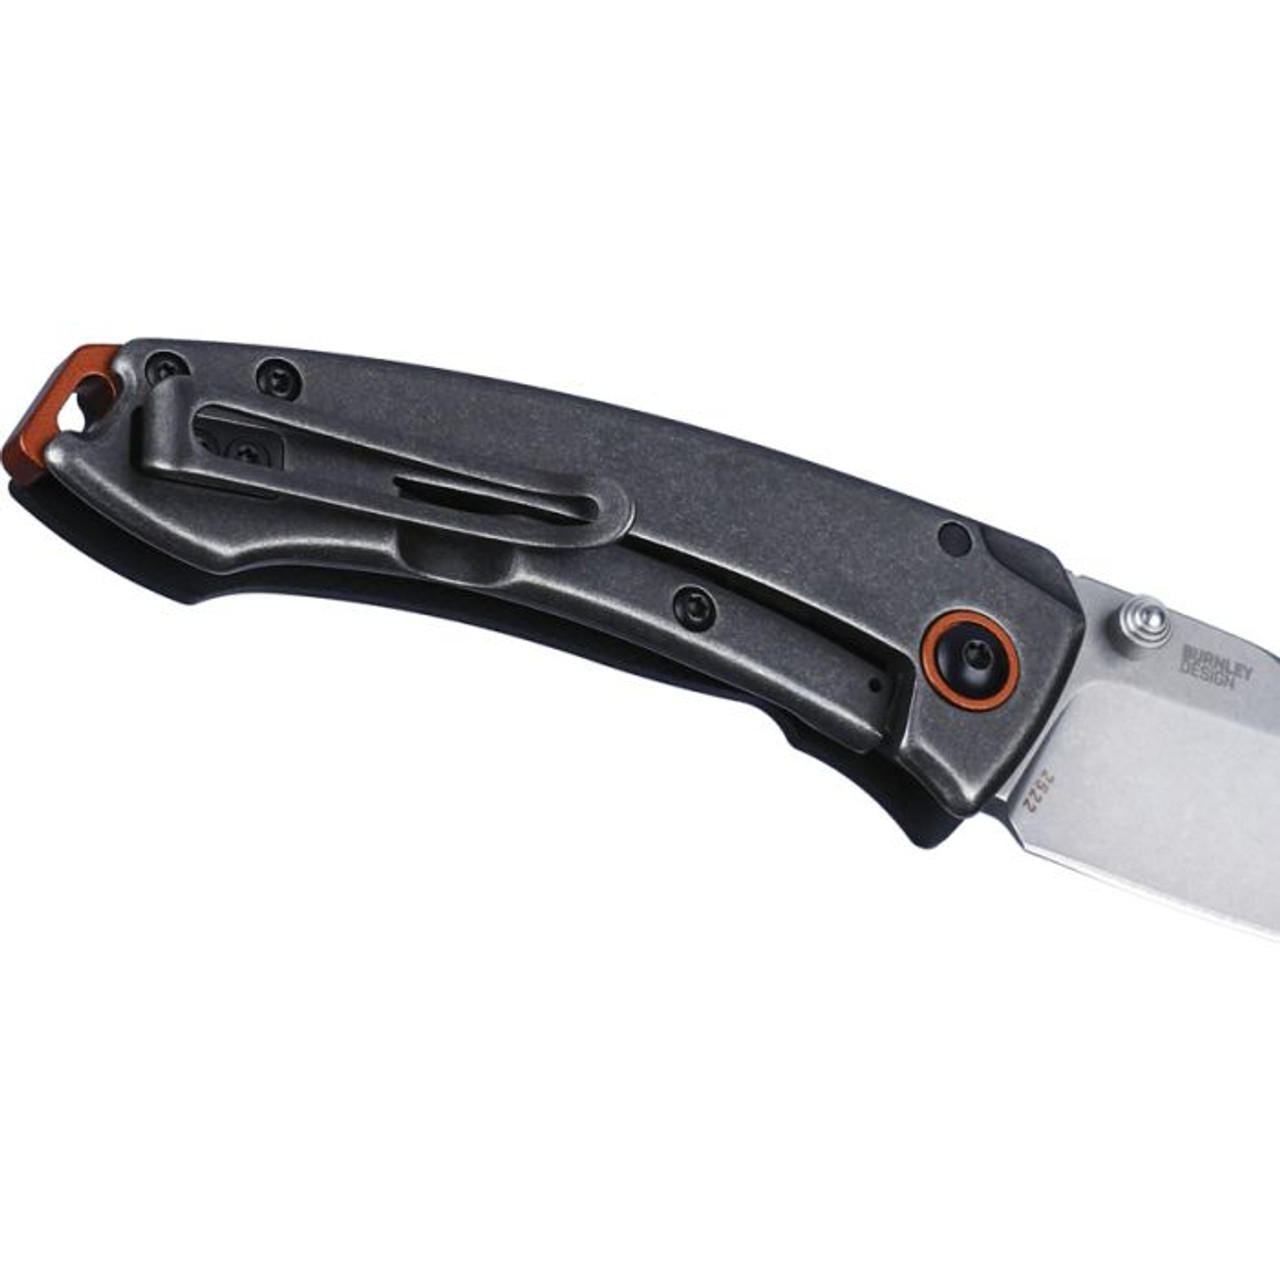 CRKT Tuna Compact (CR2522) 2.75" 8Cr13MoV Stonewashed Drop Point Plain Blade, Black G-10 Handle with Blackwashed Stainless Steel Back Handle